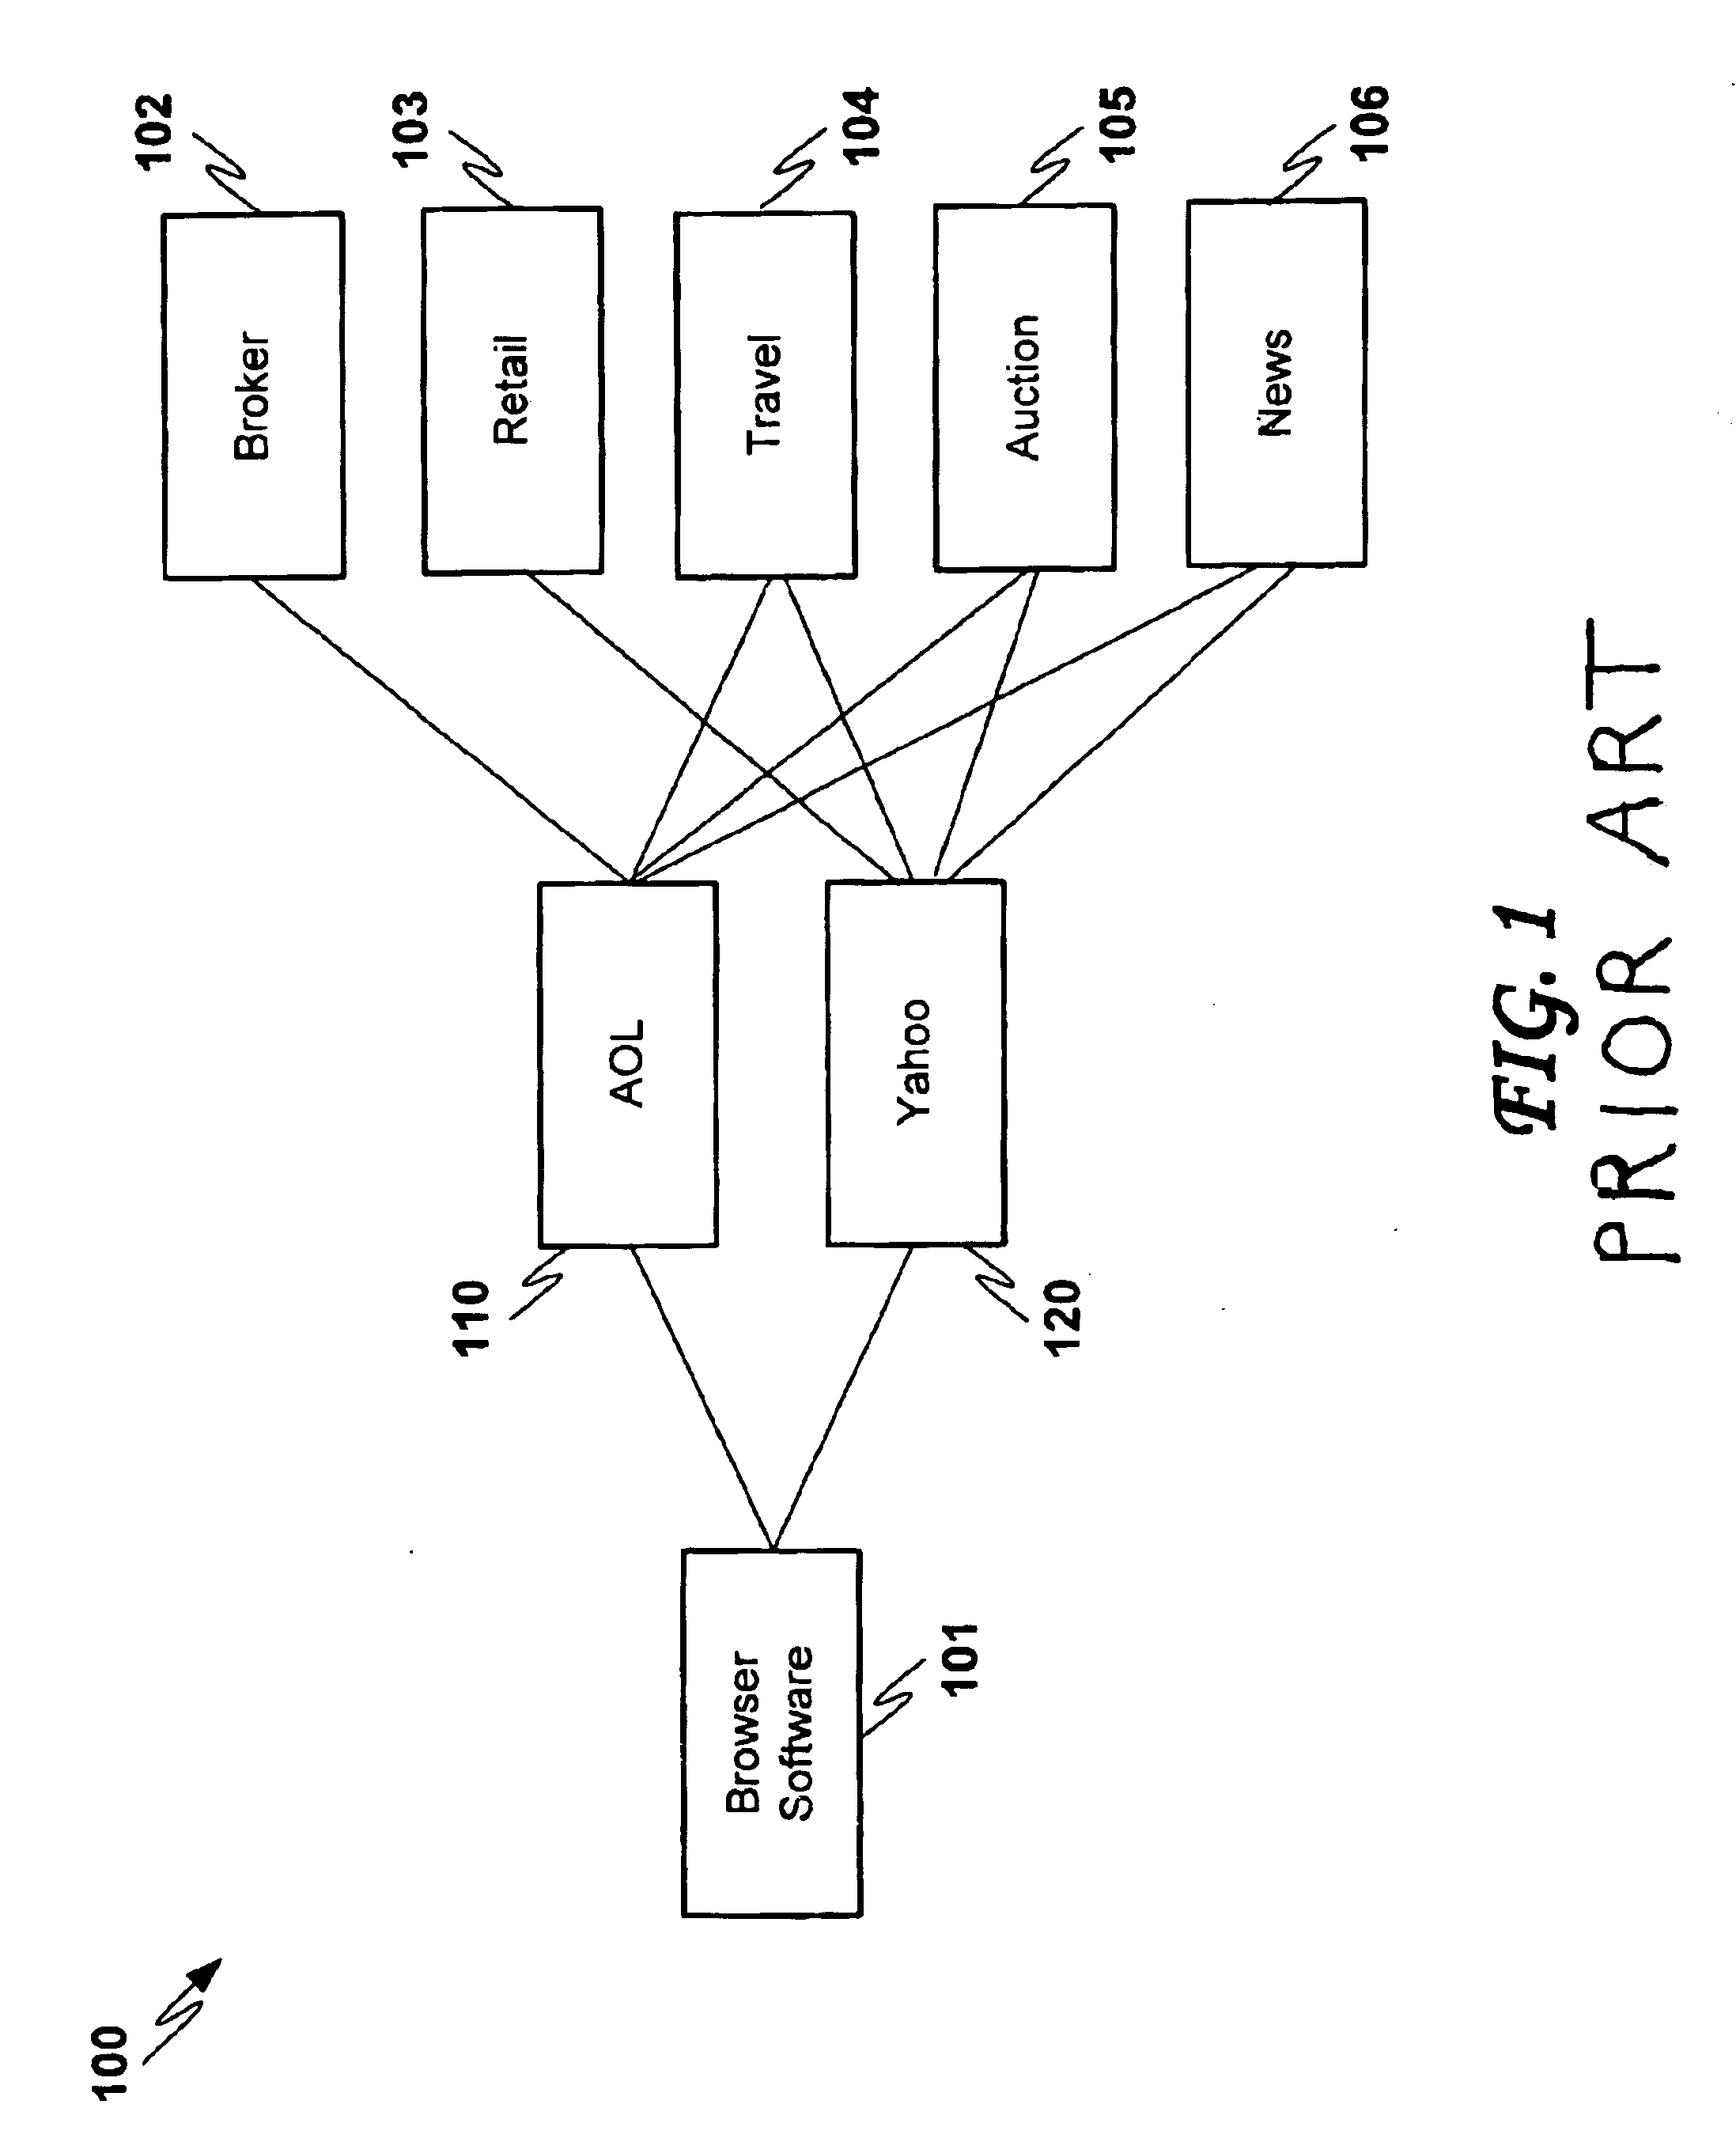 Web based email control center for monitoring and providing a sumary of the detected event information organized according to relationships between the user and network sites